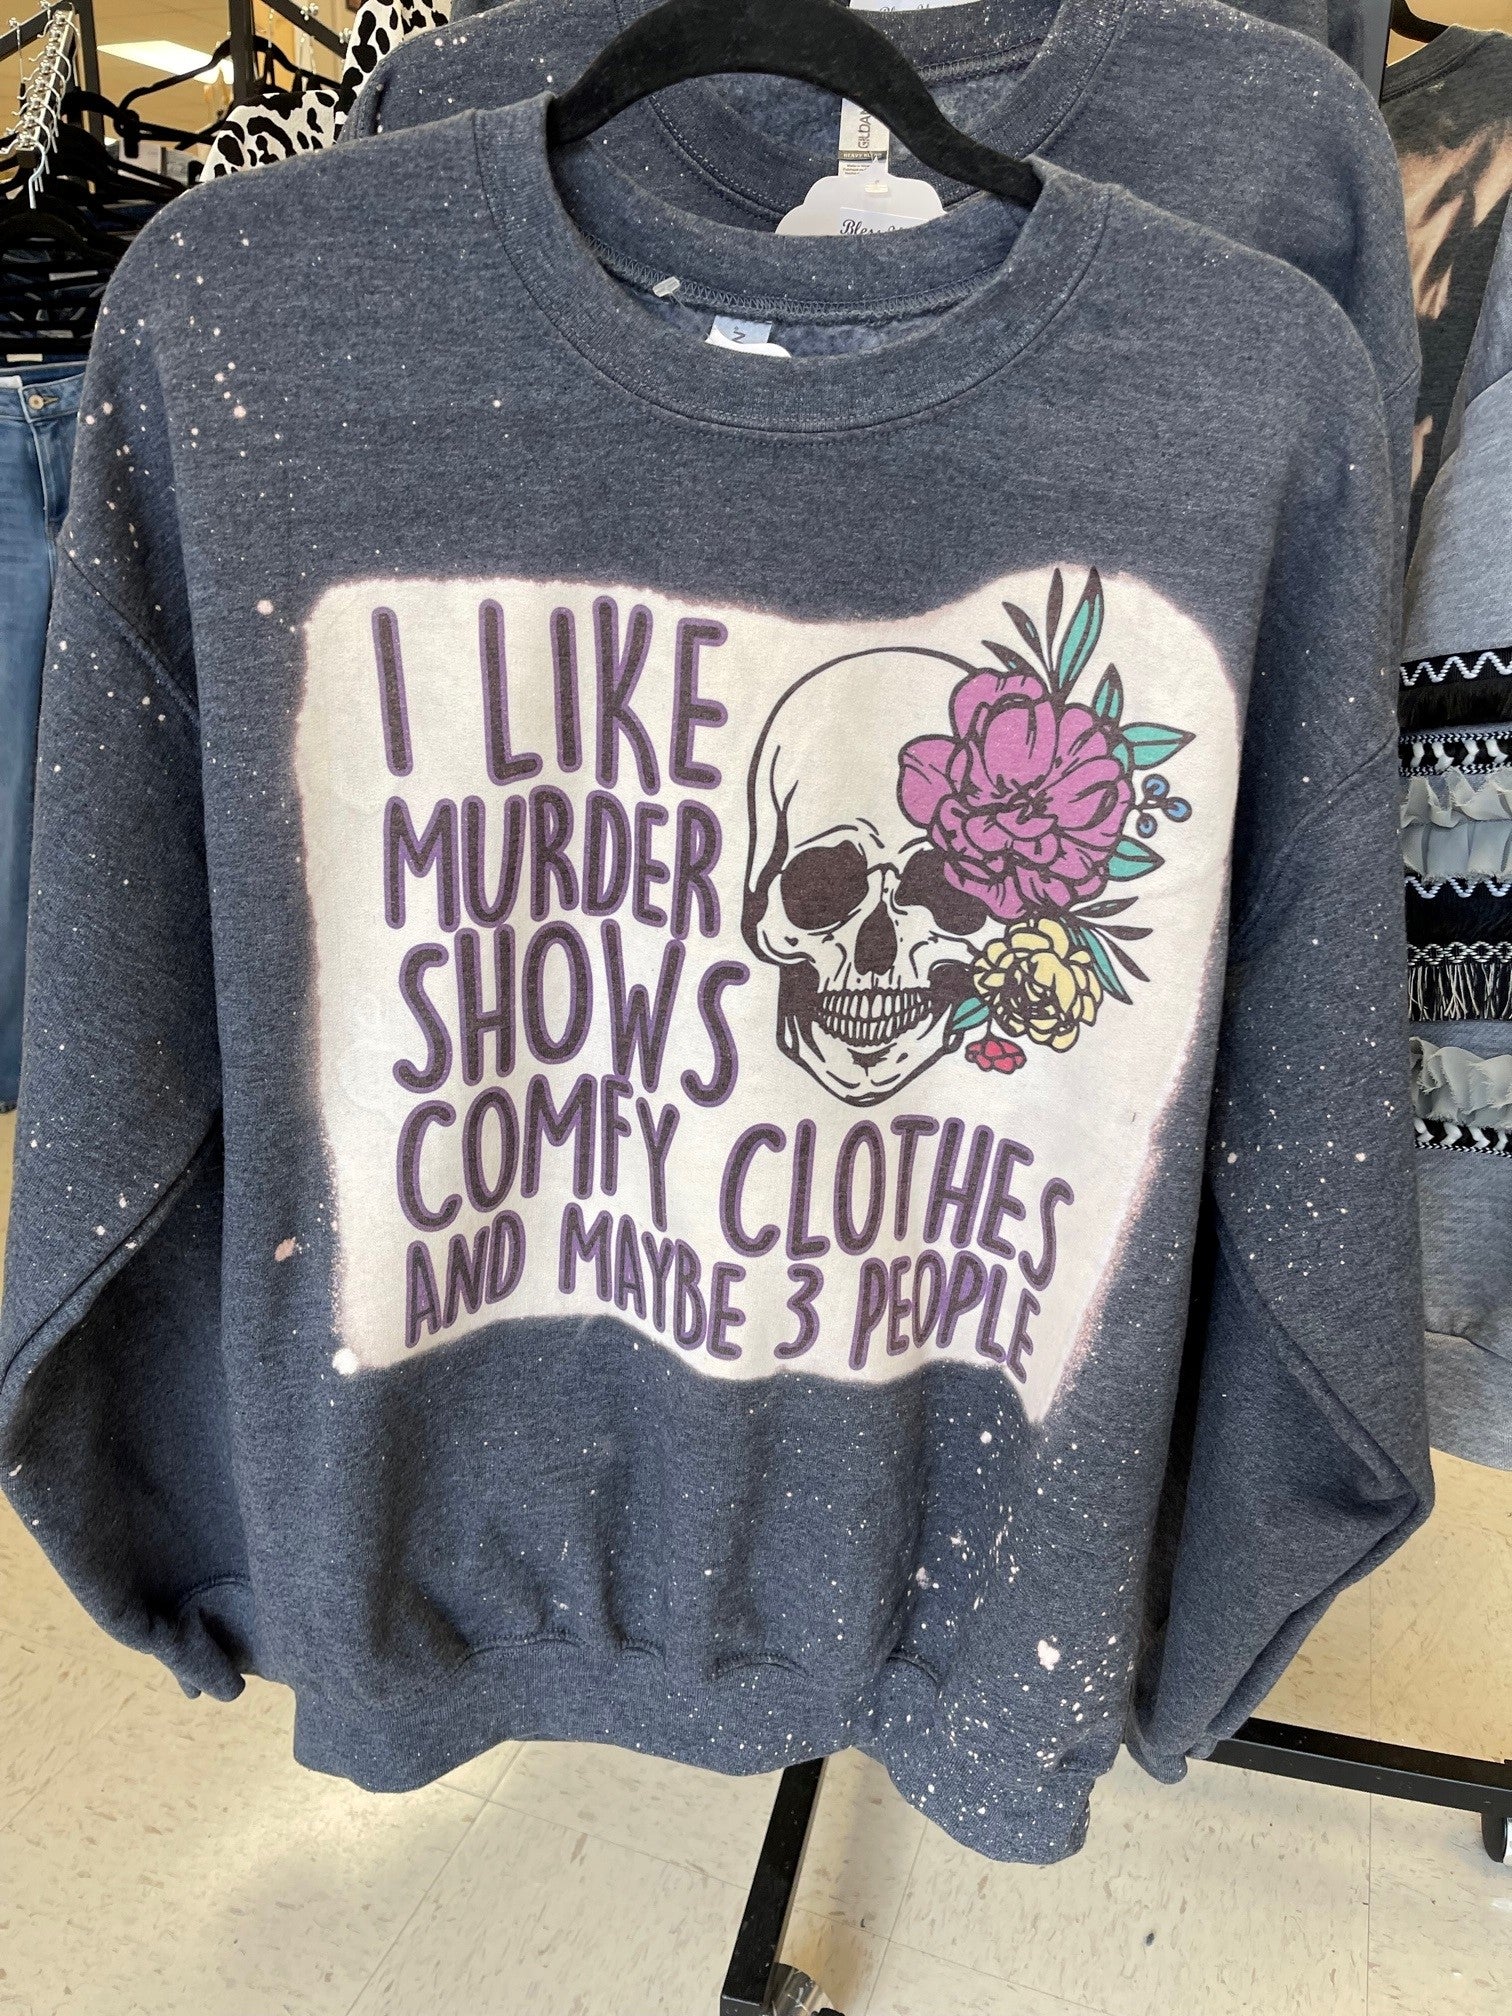 I Like Murder Shows Comfy Clothes and Maybe 3 People Sweatshirt